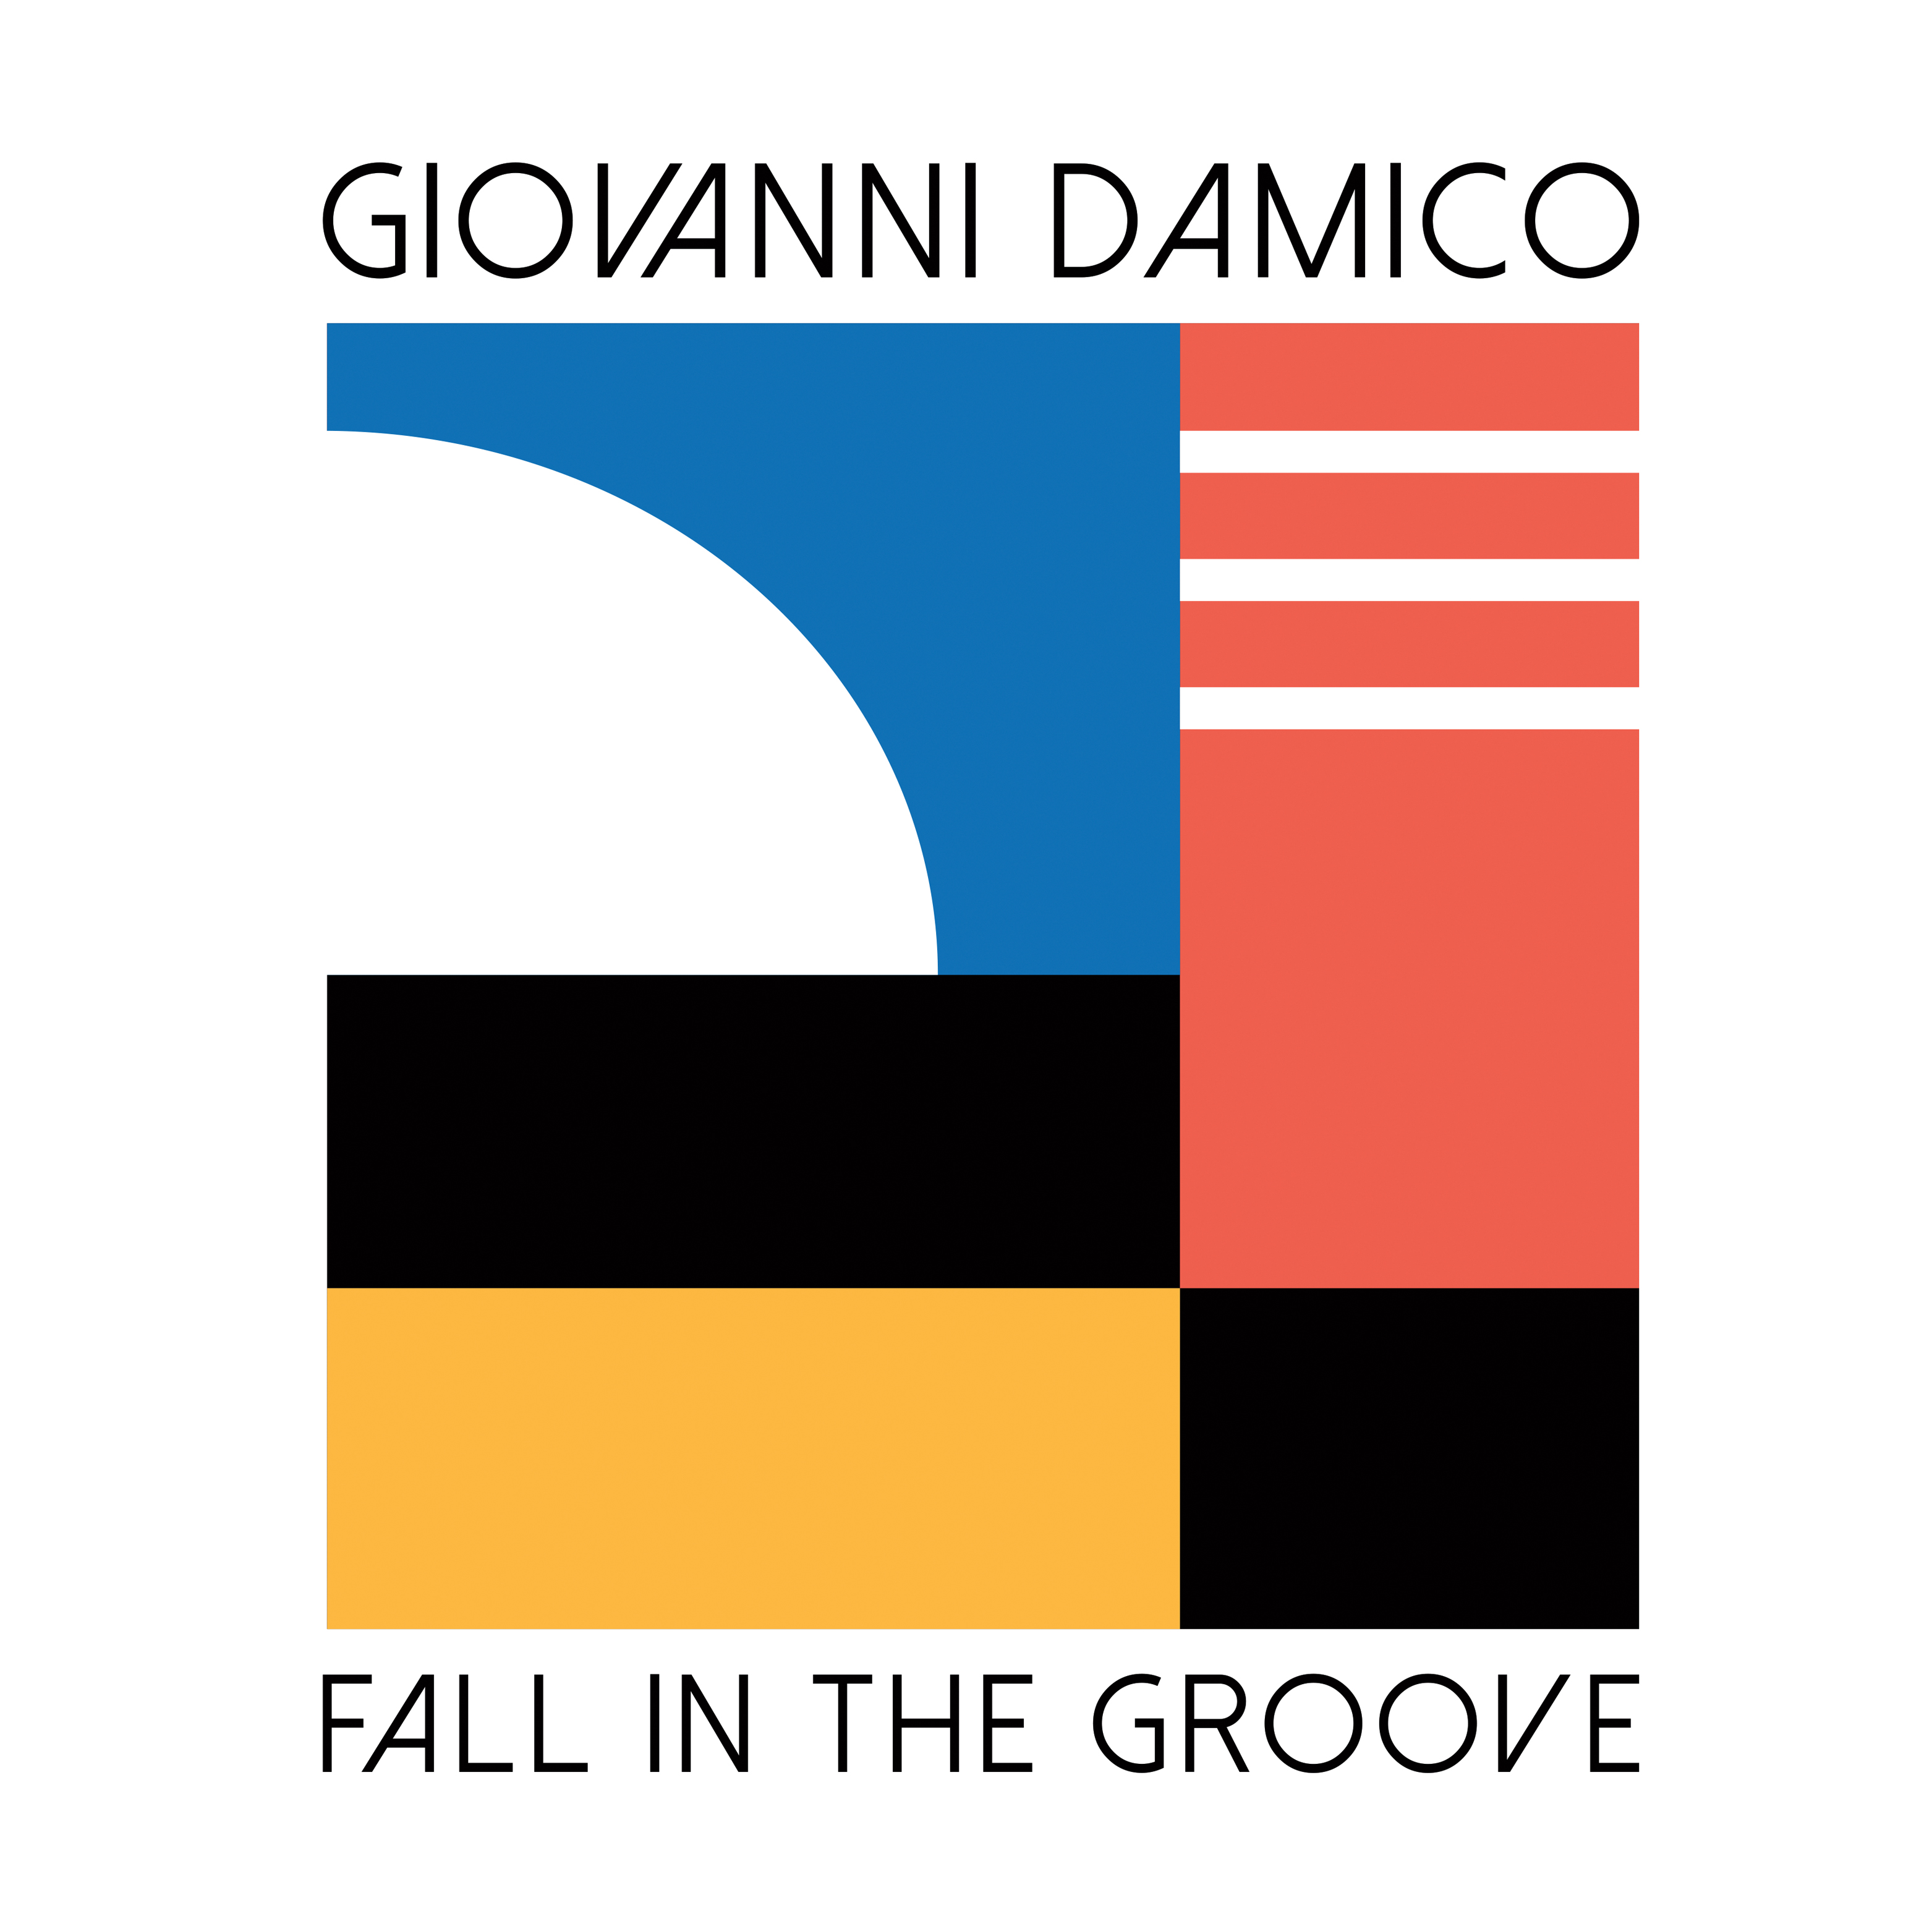 Giovanni Damico/FALL IN THE GROOVE 12"